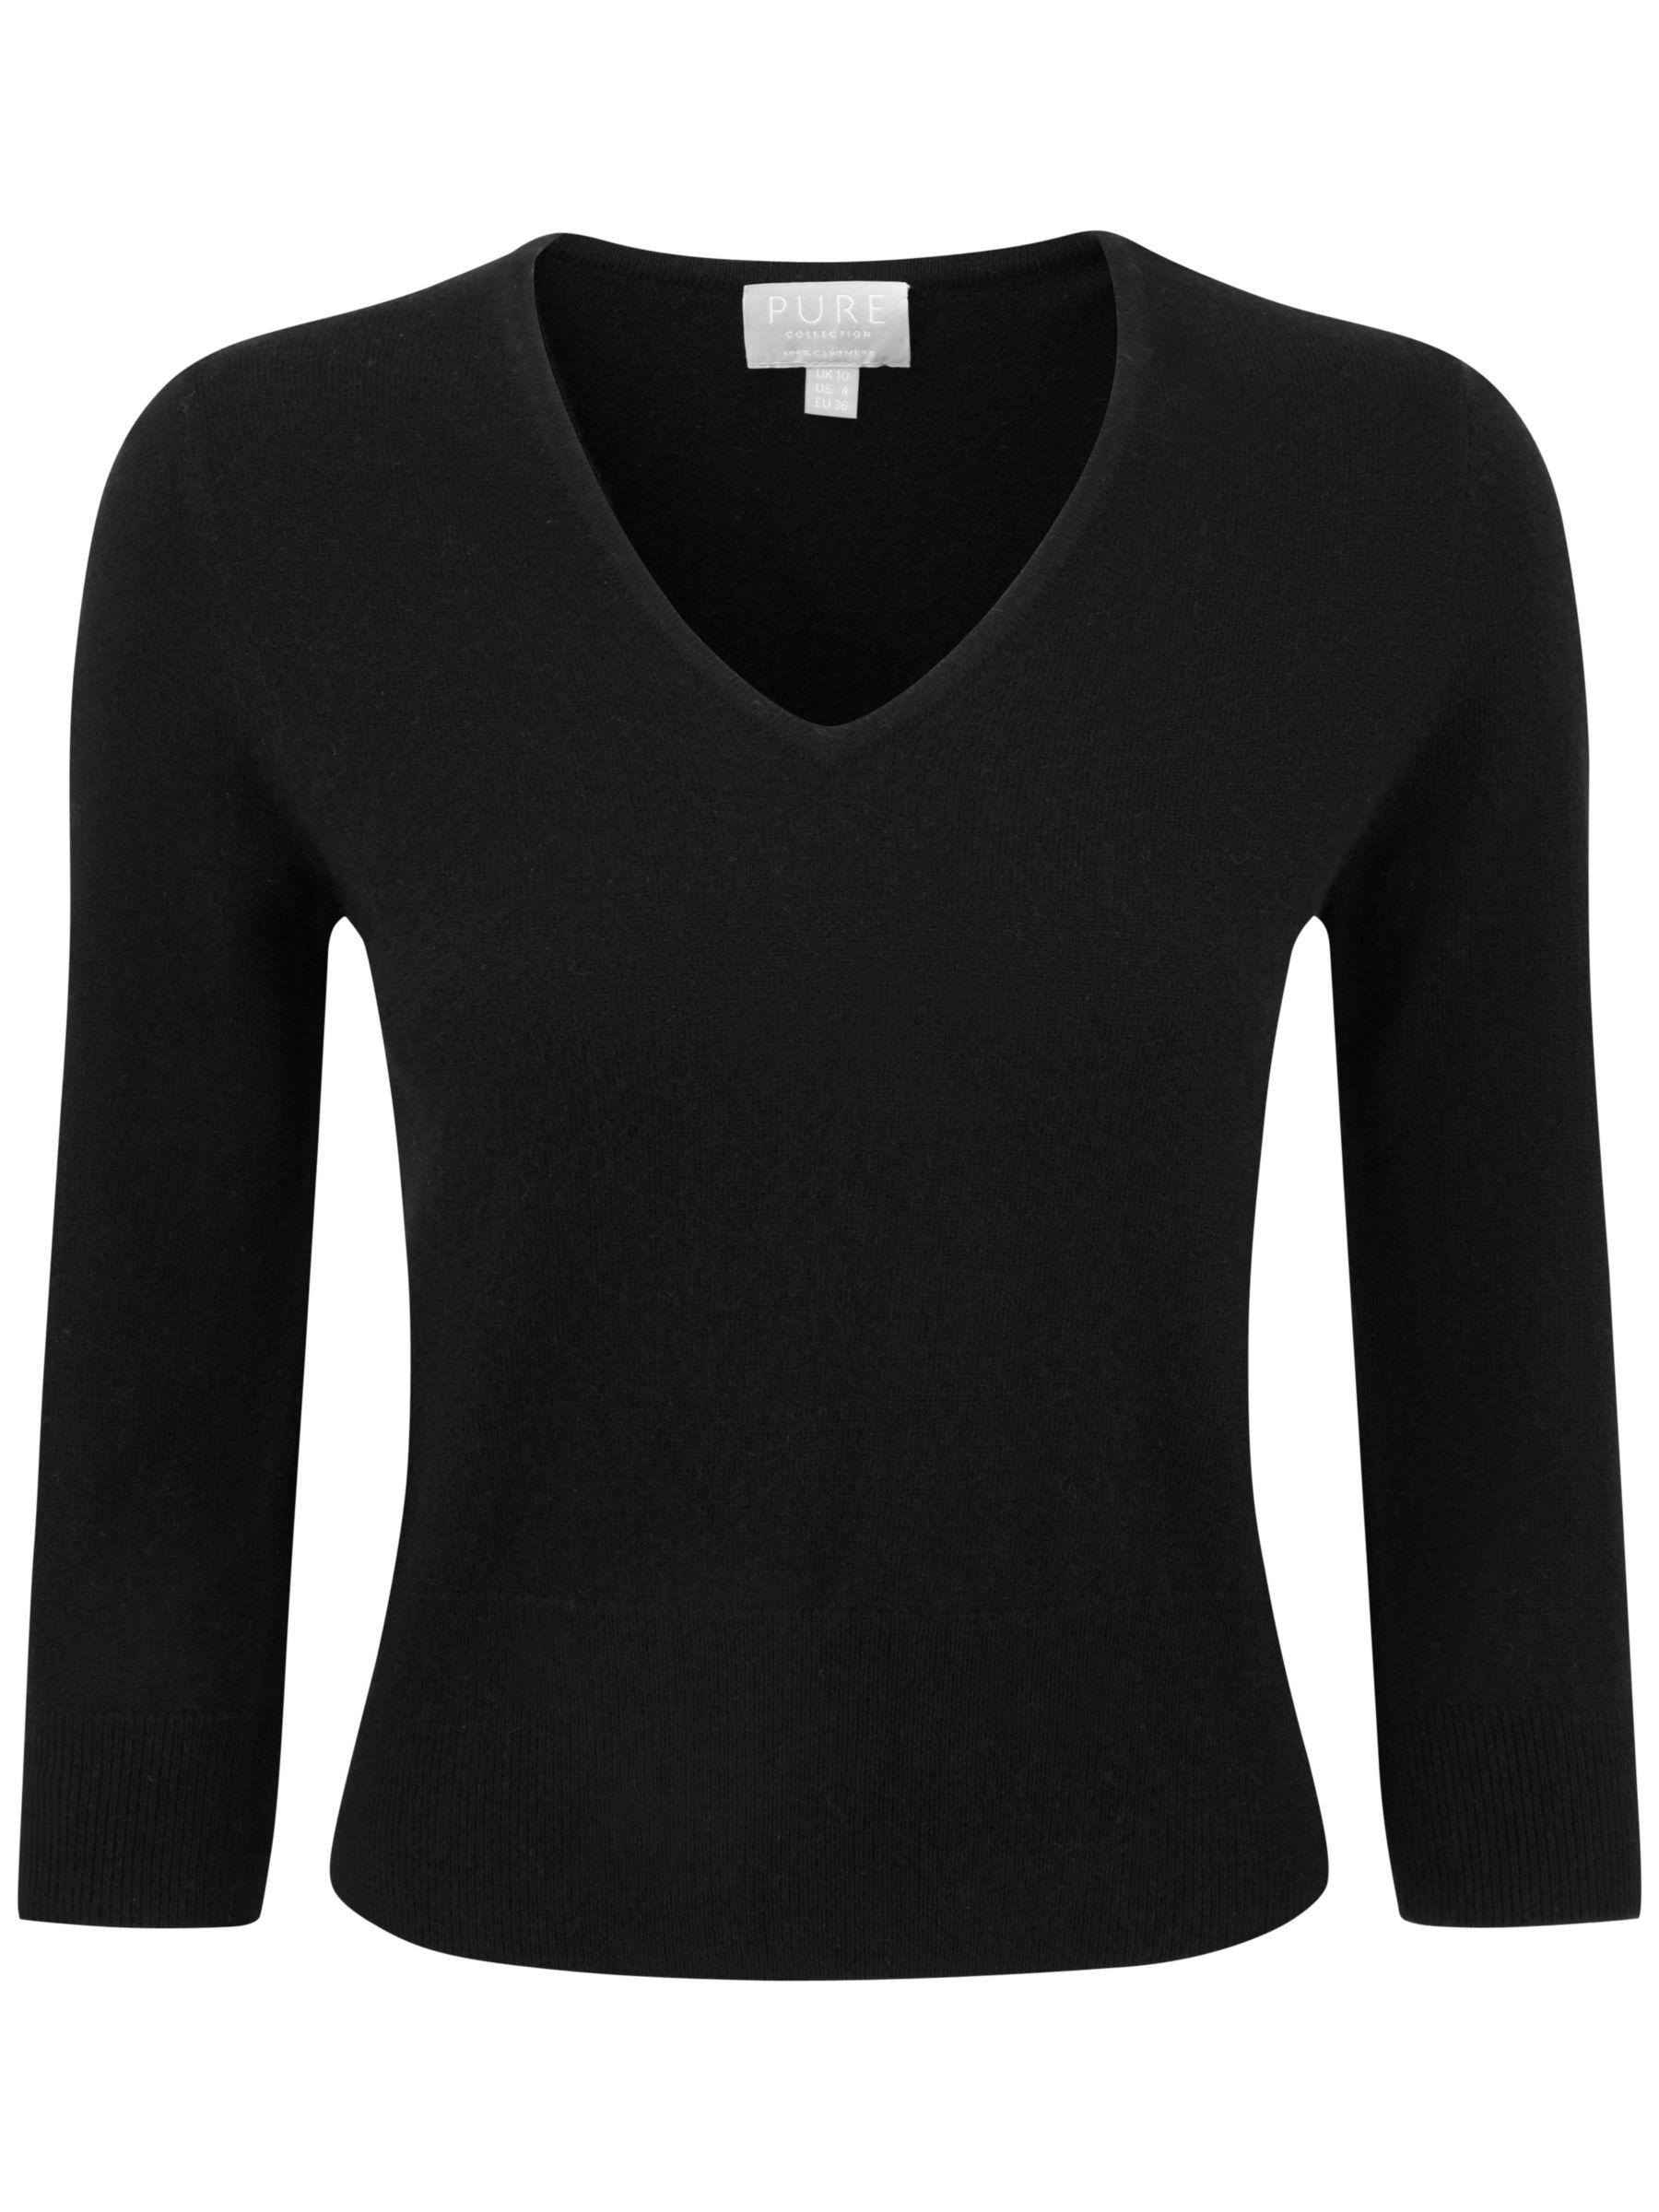 Pure Collection Cropped Cashmere Jumper at John Lewis & Partners